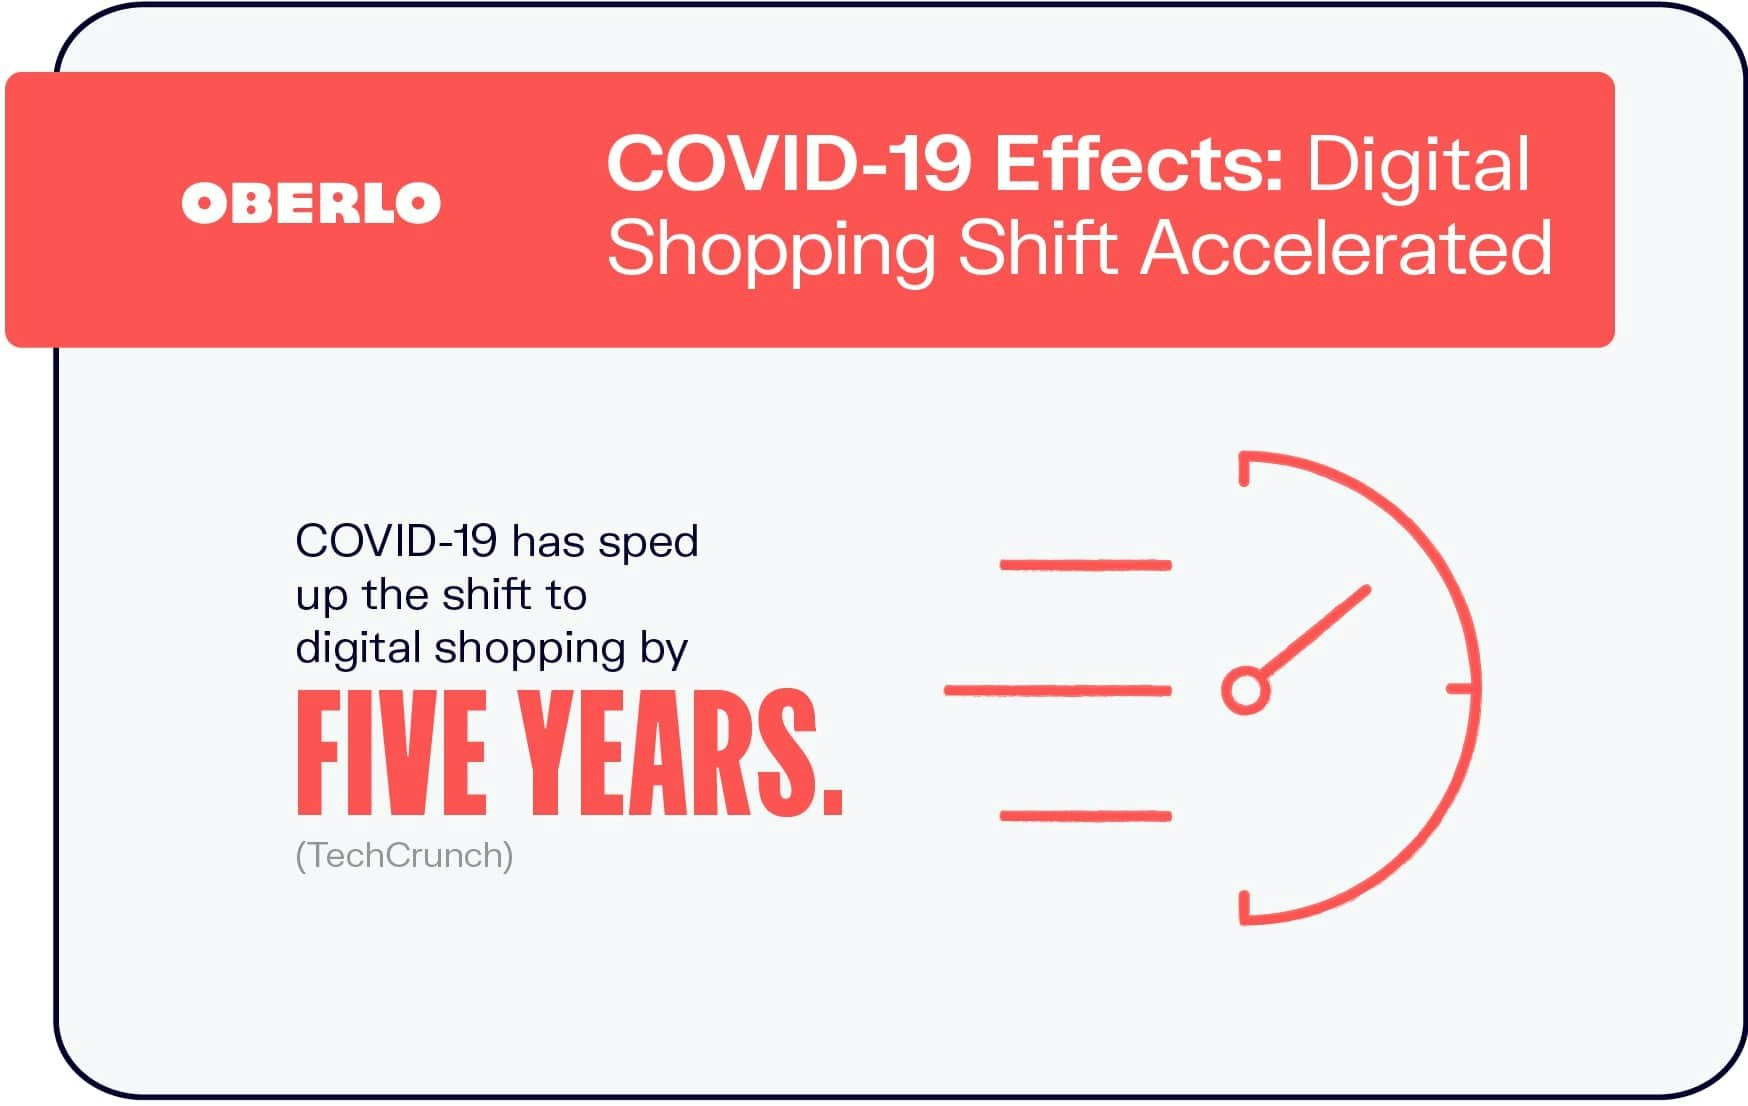 COVID-19 Effects: Digital Shopping Shift Accelerated